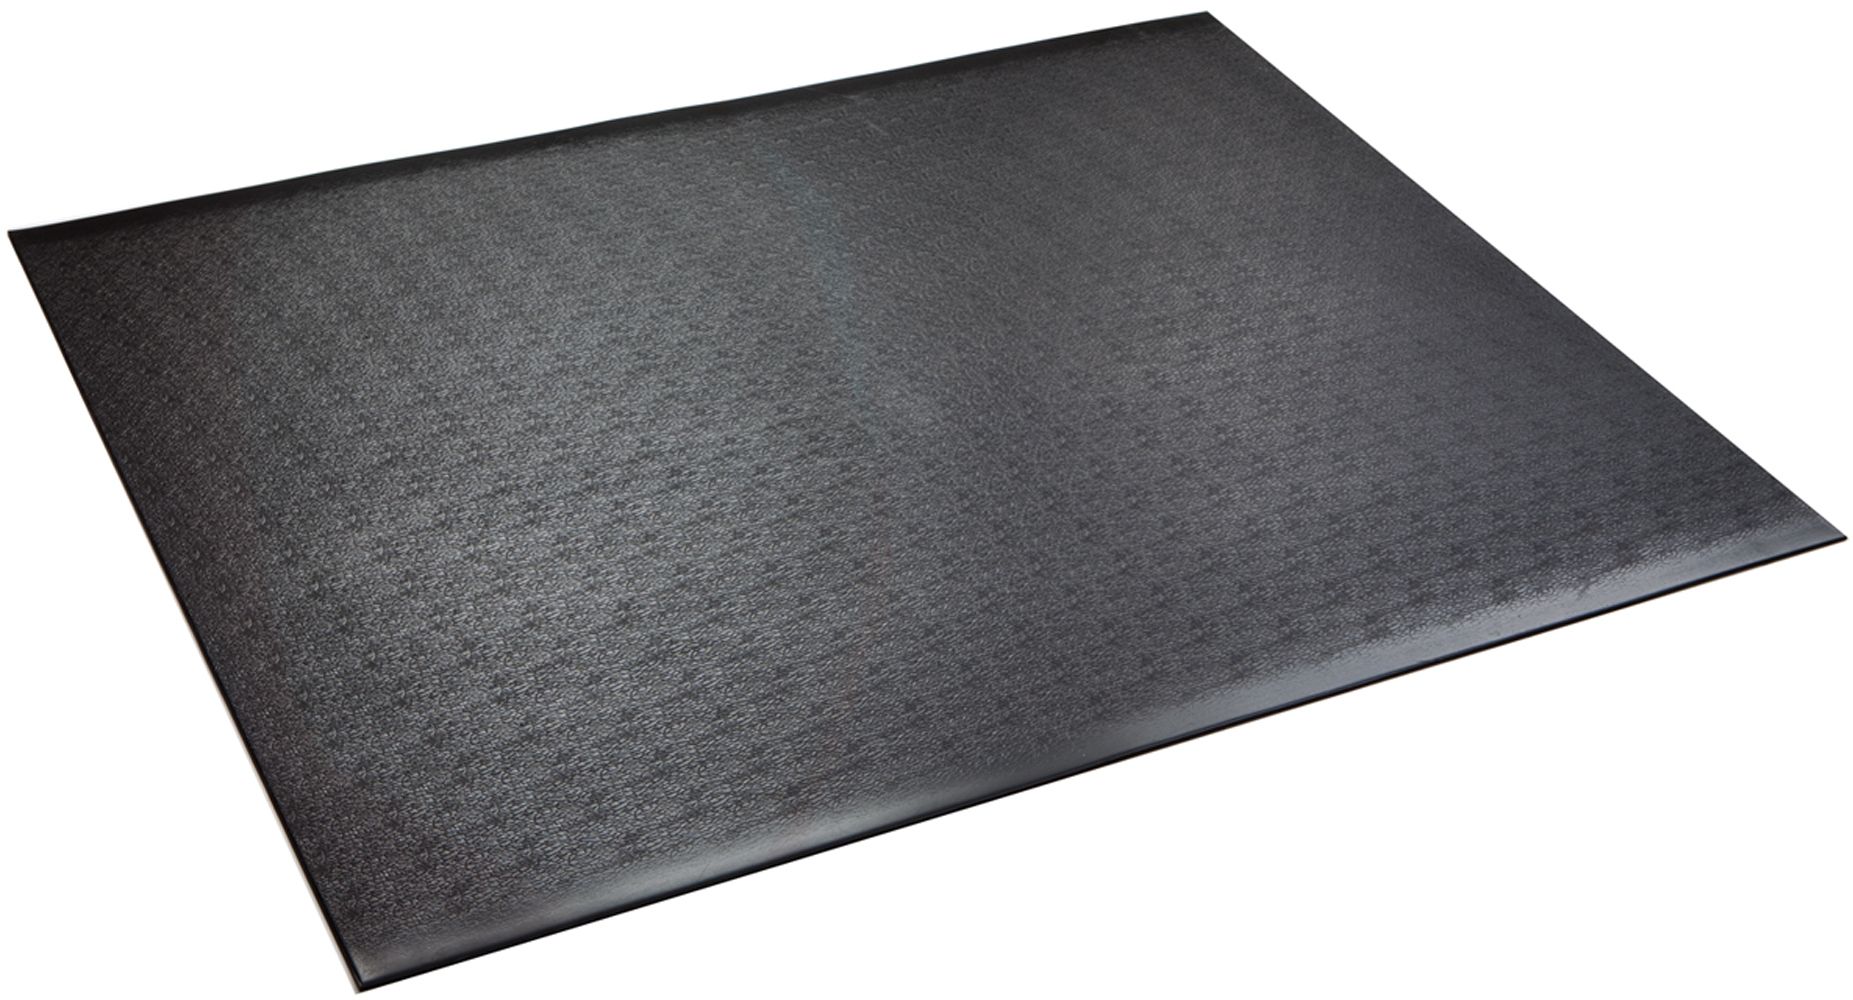 sports mats for sale